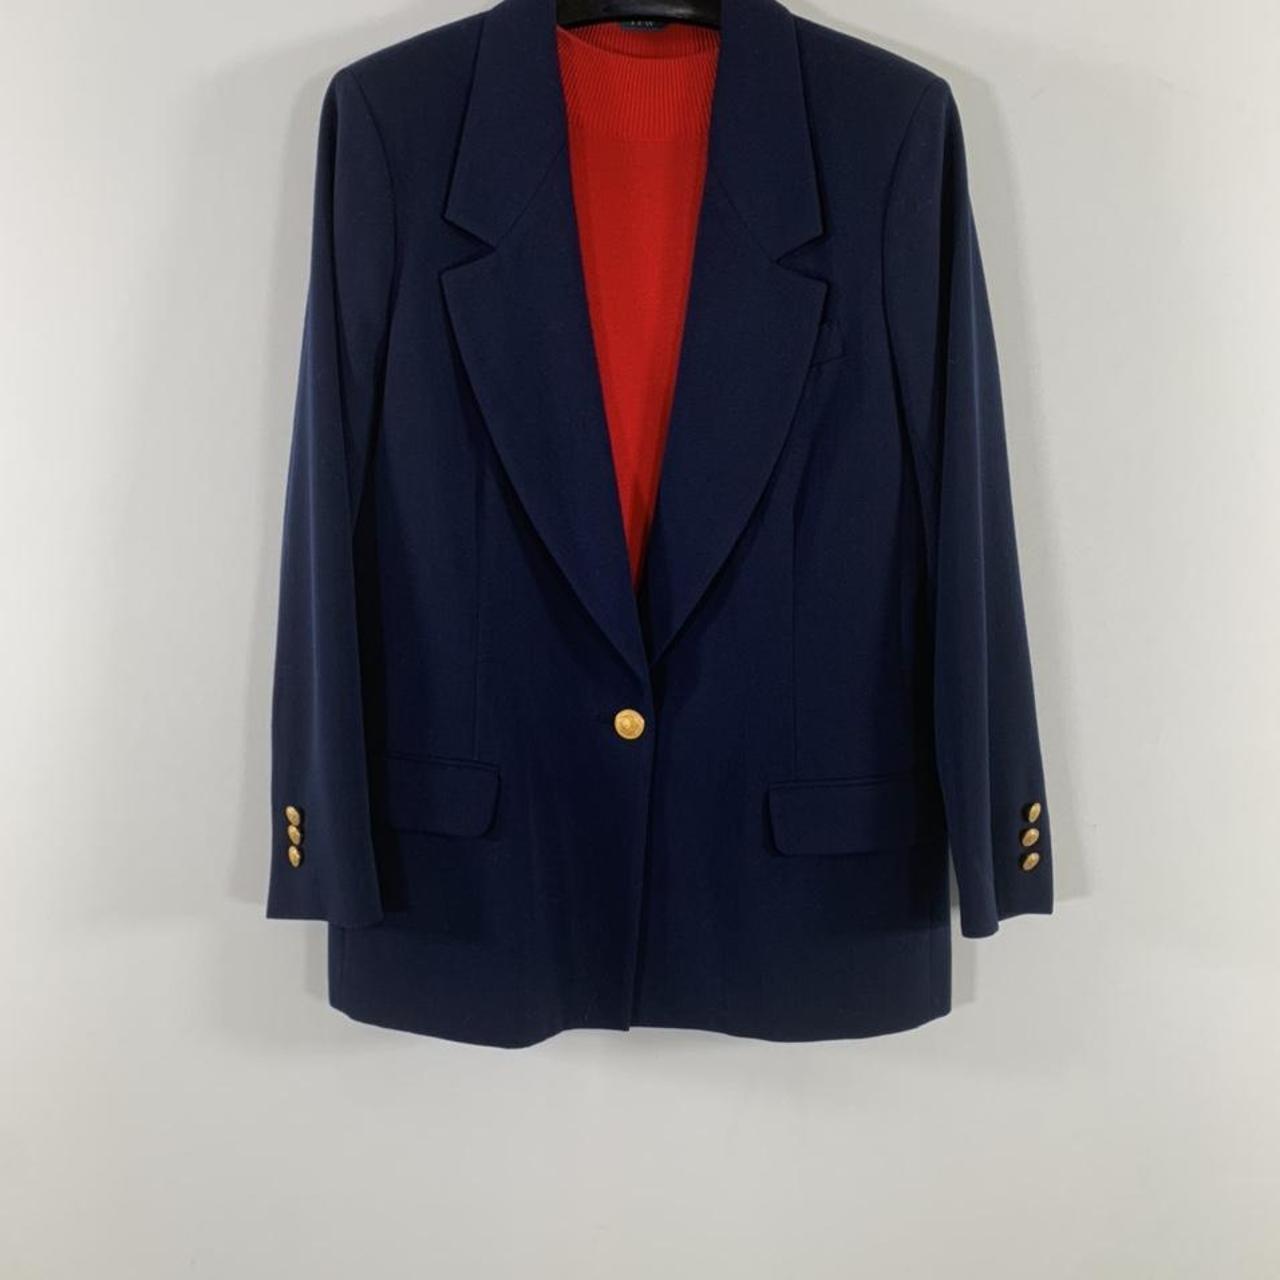 Hawke & Co. Women's Red and Blue Tailored-jackets